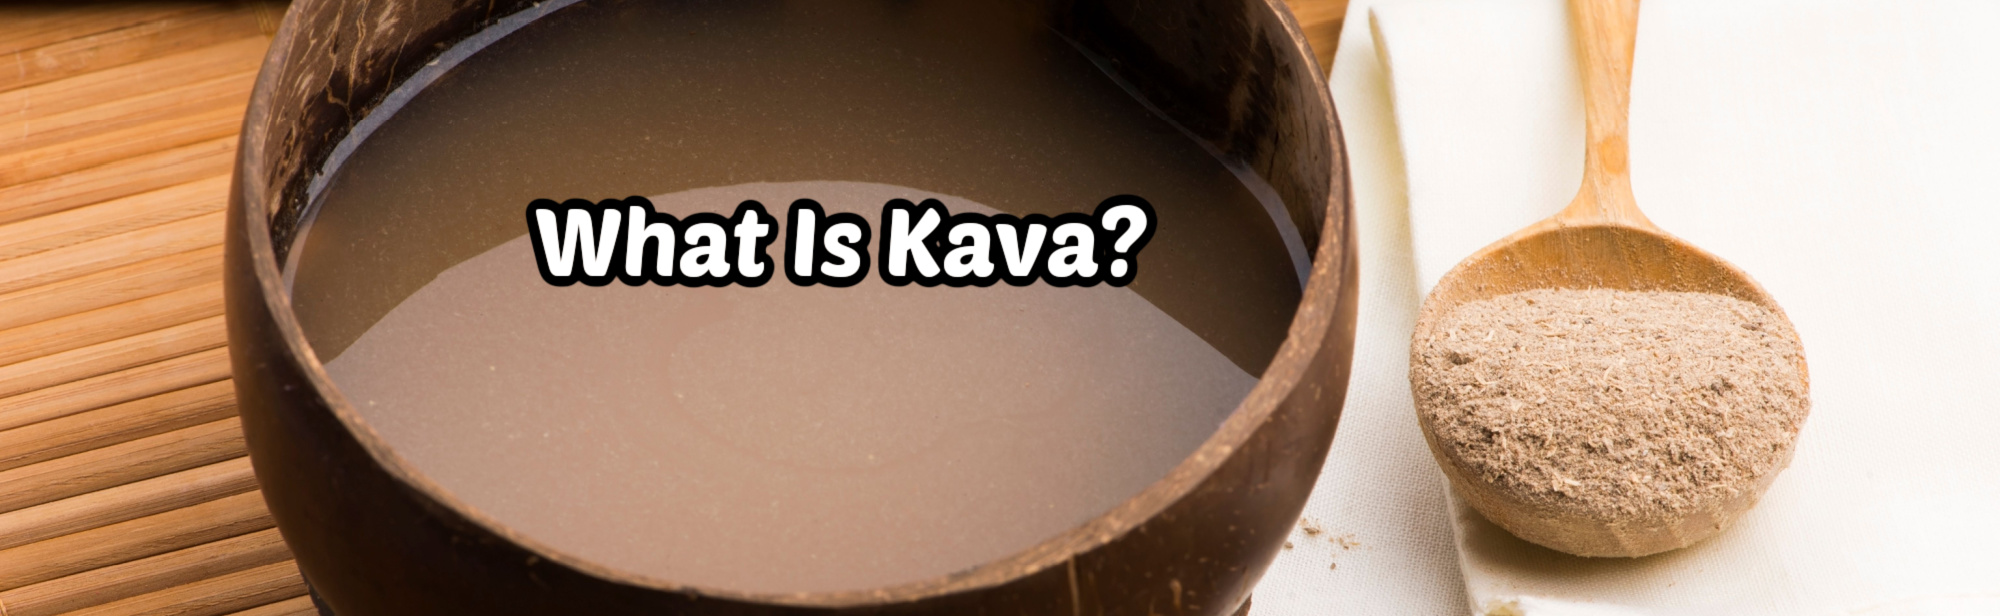 image of what is kava